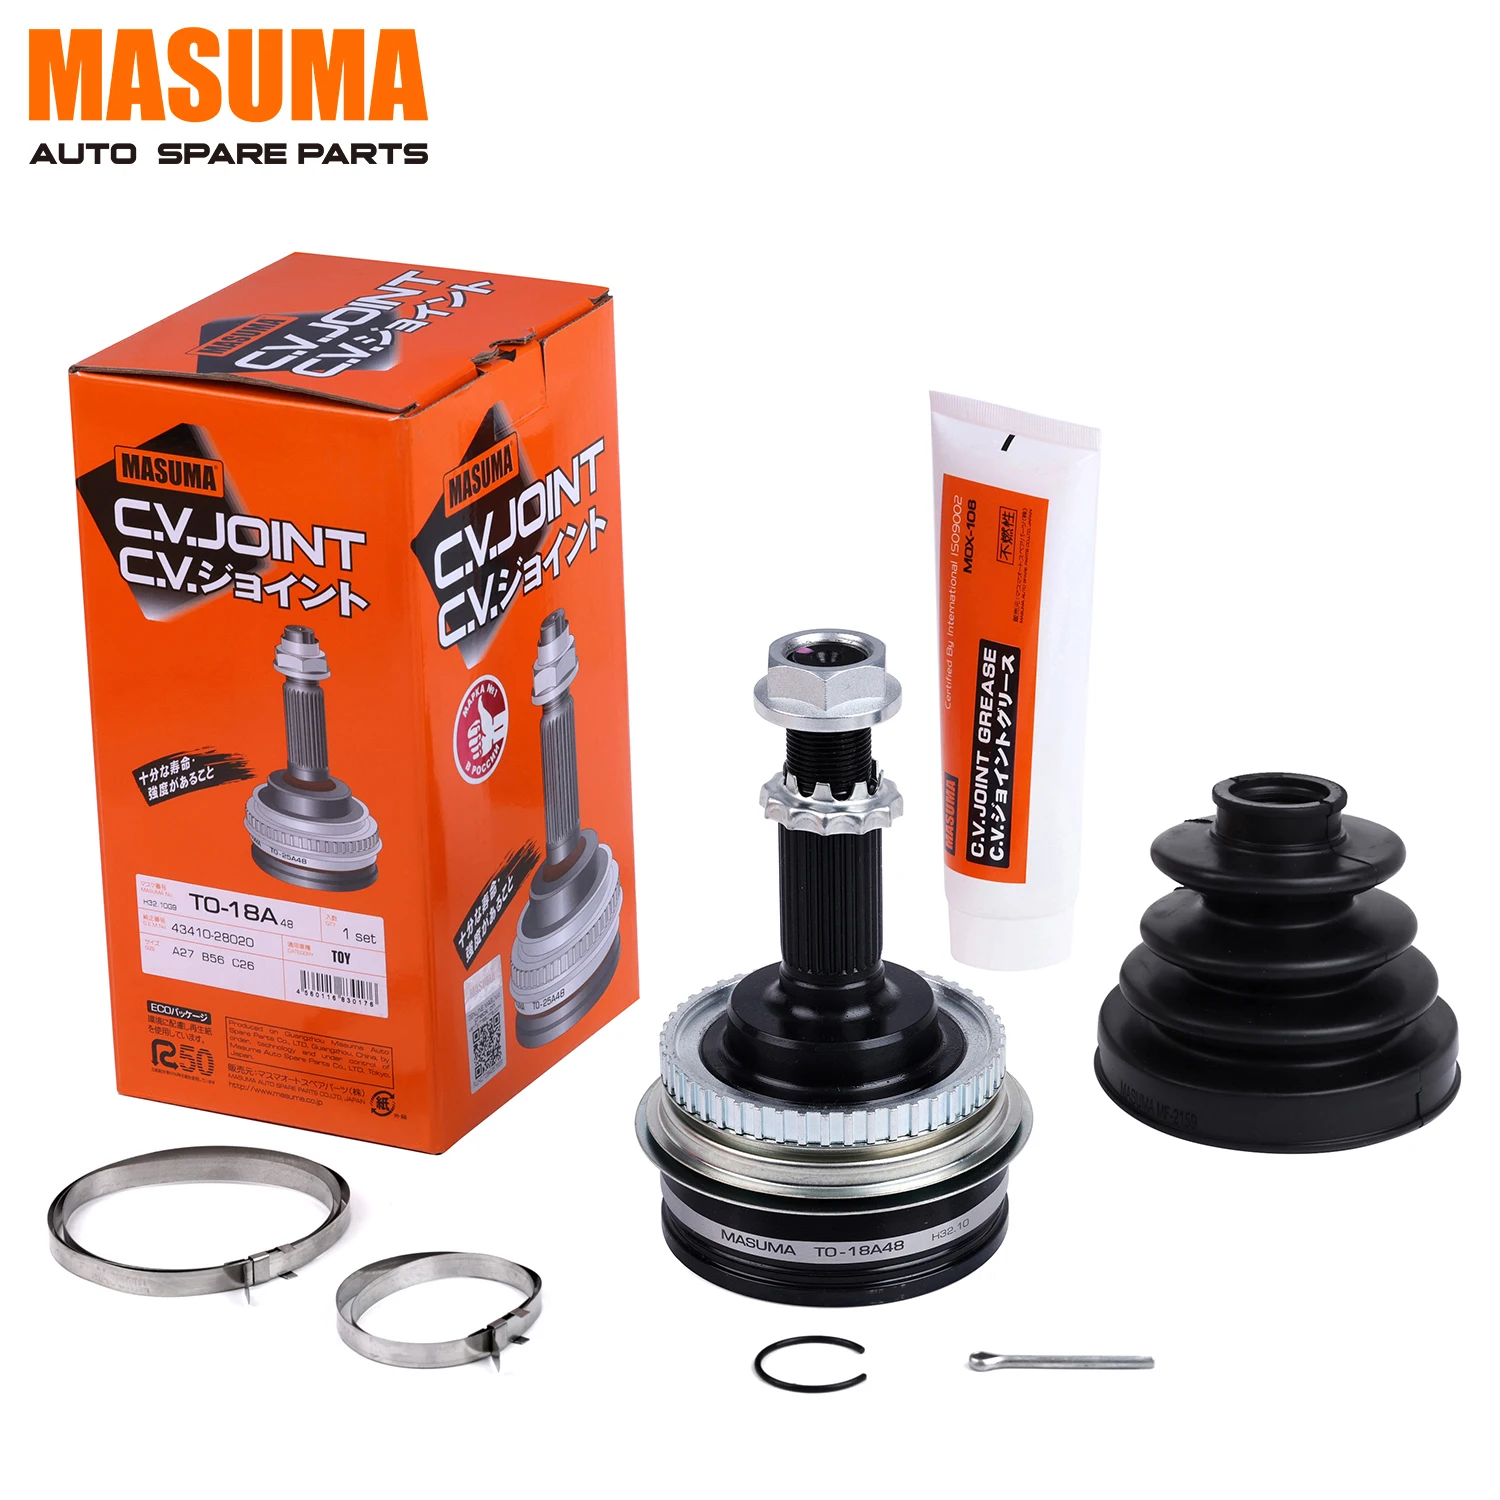 To-18a48 Masuma Auto Car Outer Drive Shaft Cv Joints Bj3p B3-me 43460-29185  43460-29187 43460-29188 For Toyota Camry - Buy Outer Drive Shaft Cv  Joints,Thailand Auto Car Outer Drive Shaft Cv 